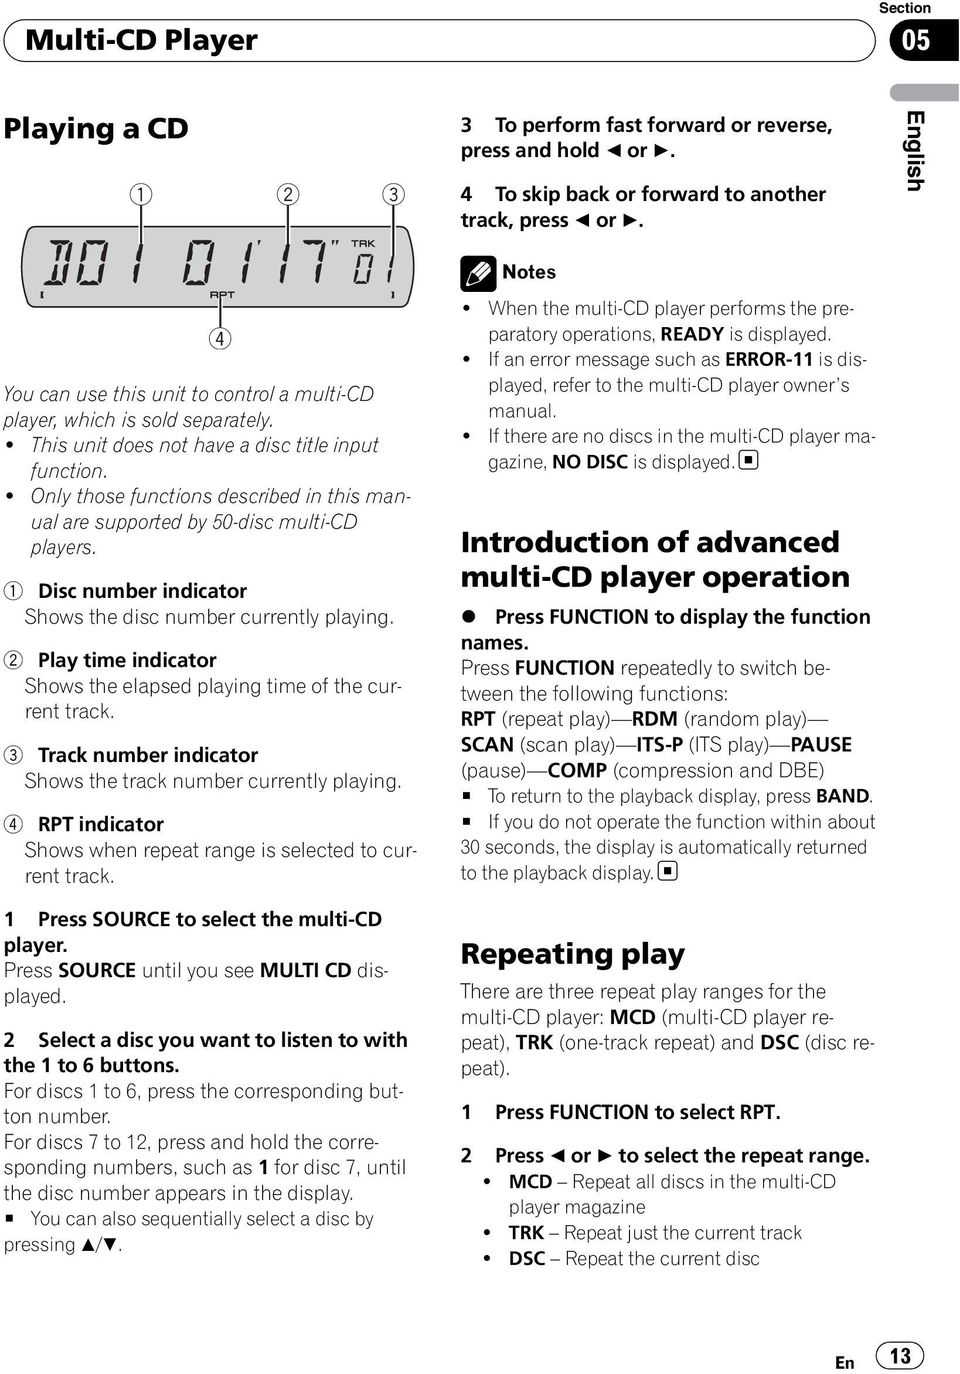 ! Only those functions described in this manual are supported by 50-disc multi-cd players. 1 Disc number indicator Shows the disc number currently playing.